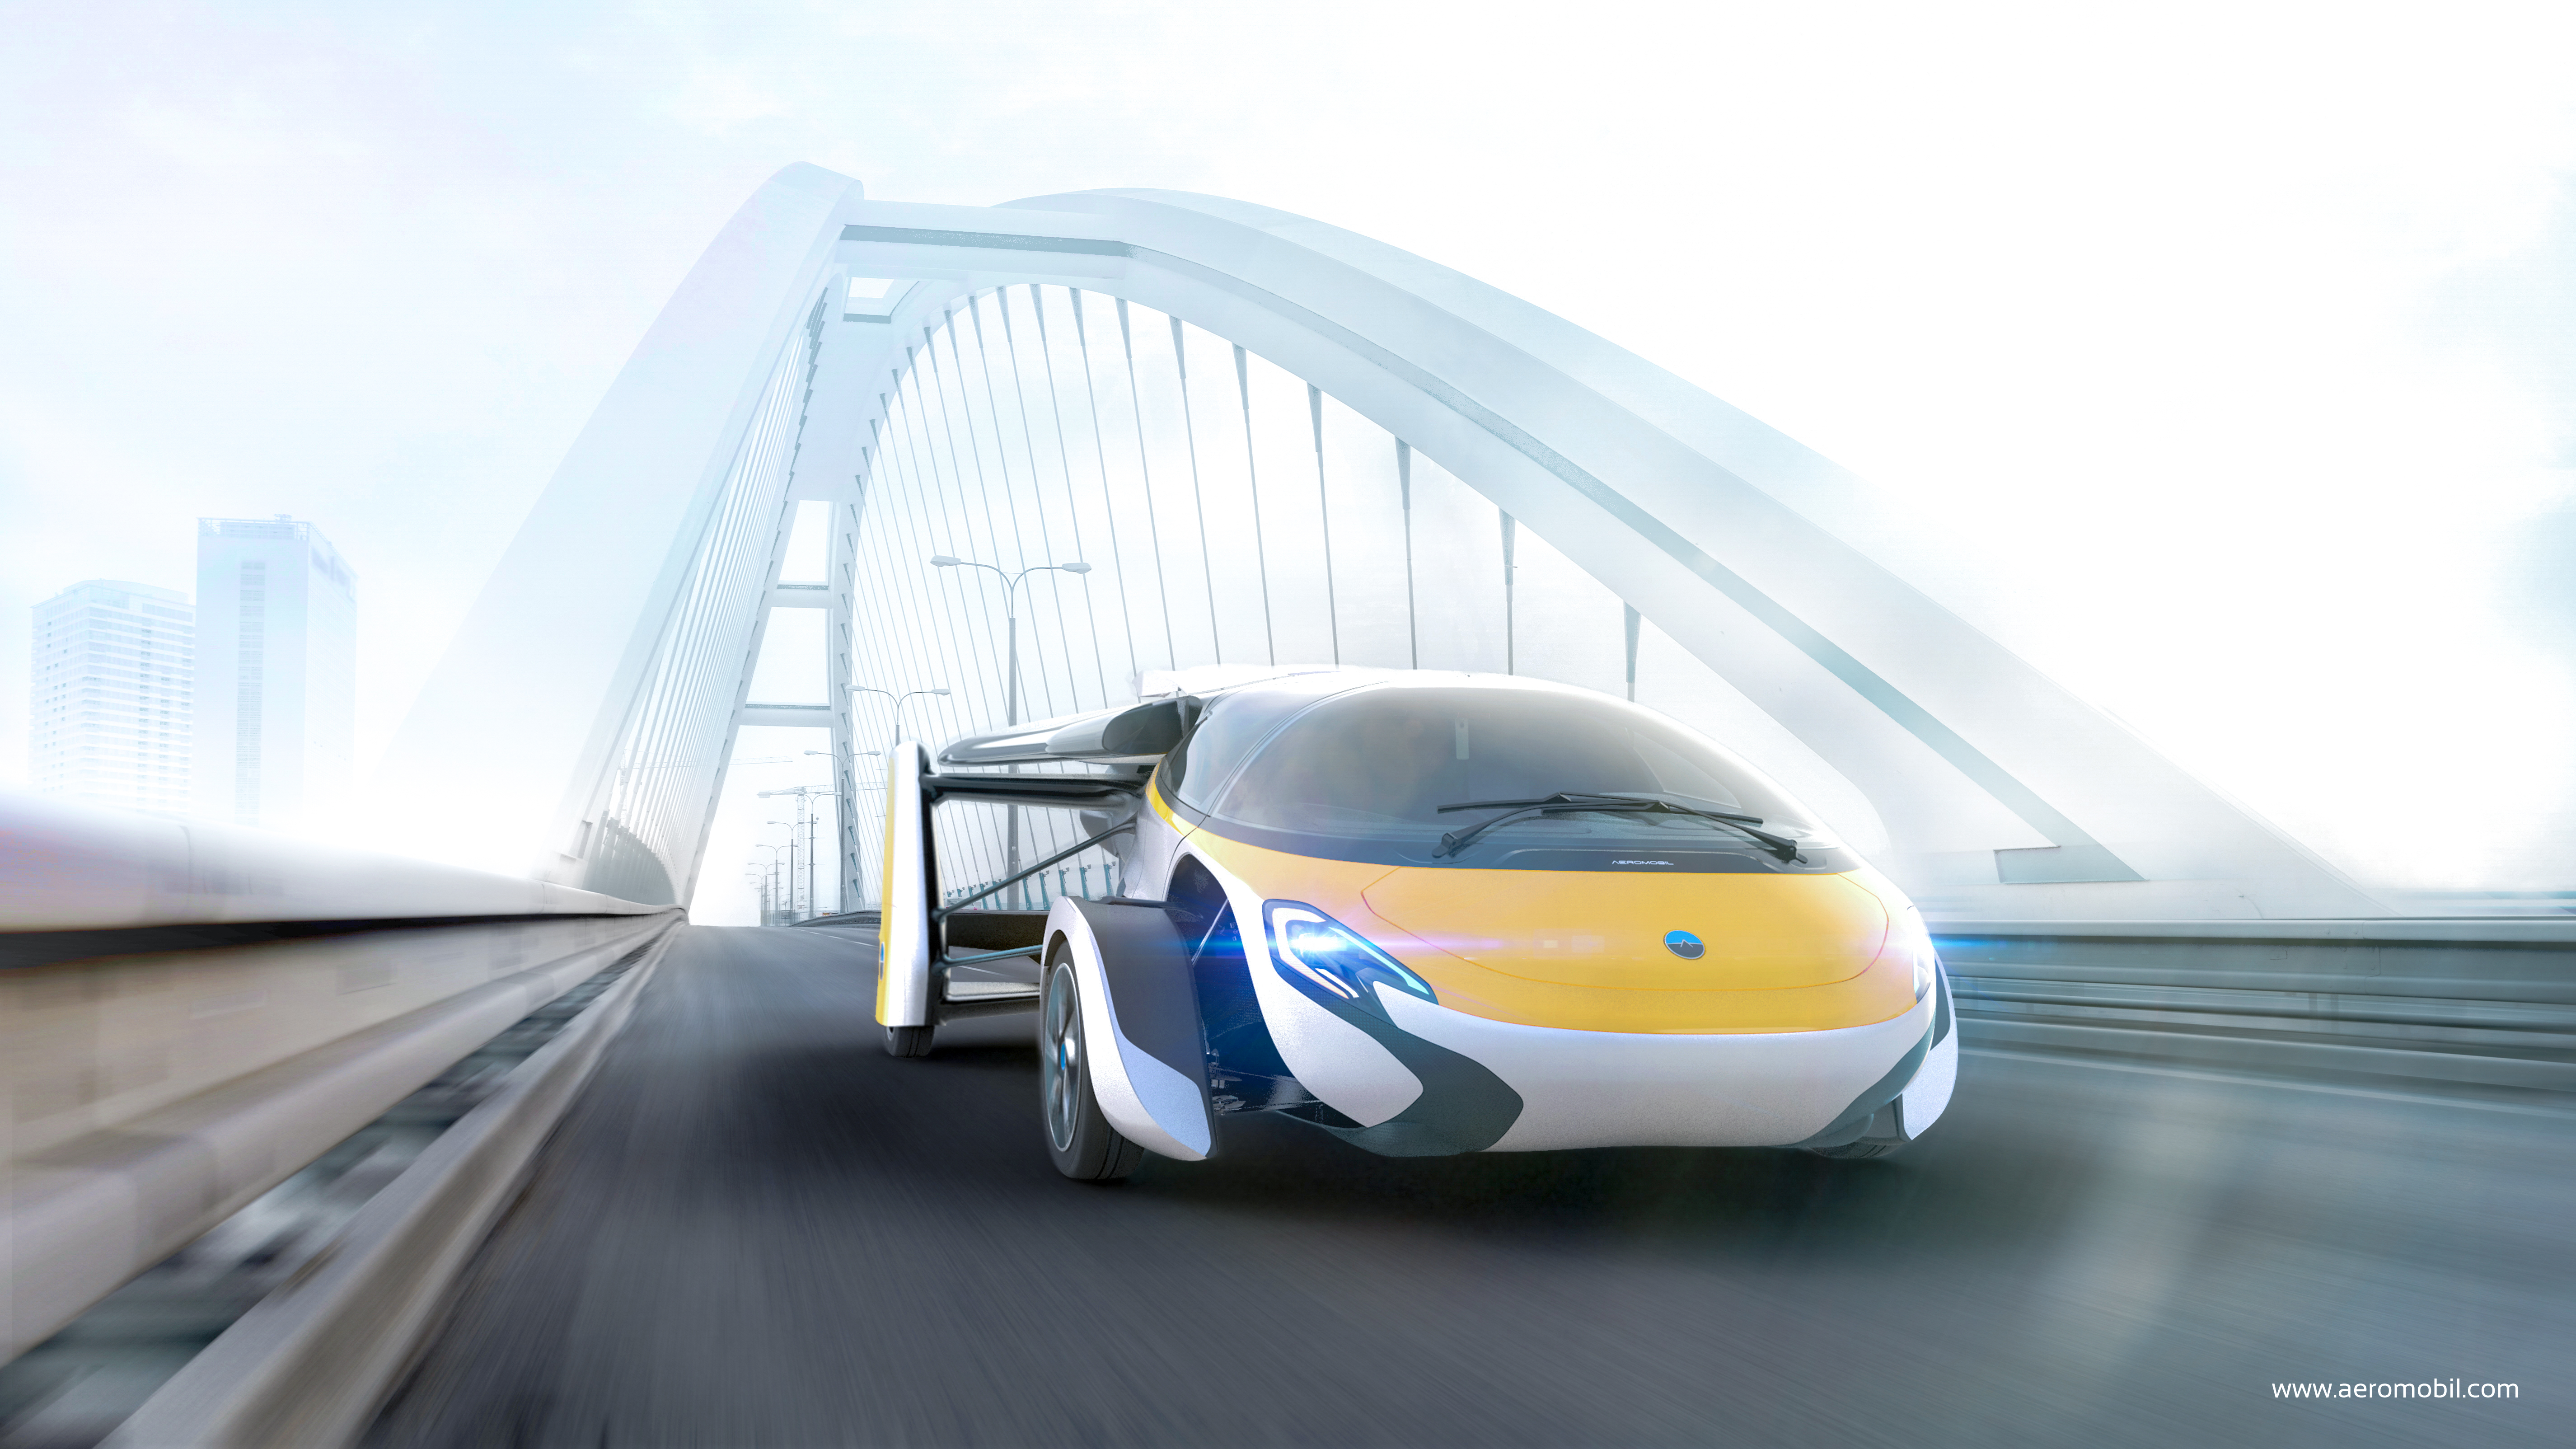 AeroMobil starts taking pre-orders for its 'first edition' flying car